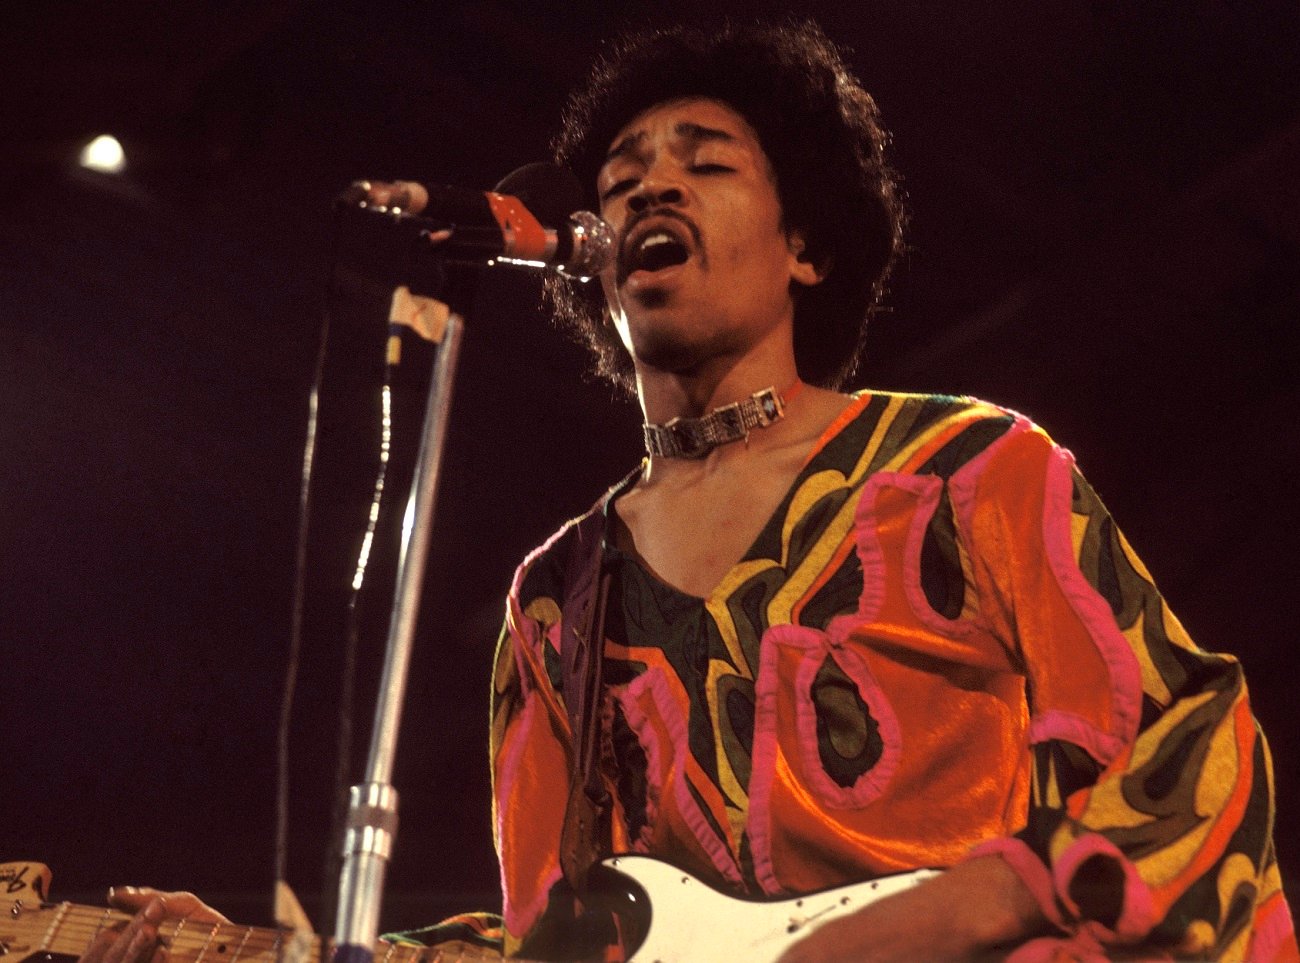 Jimi Hendrix on stage in 1970